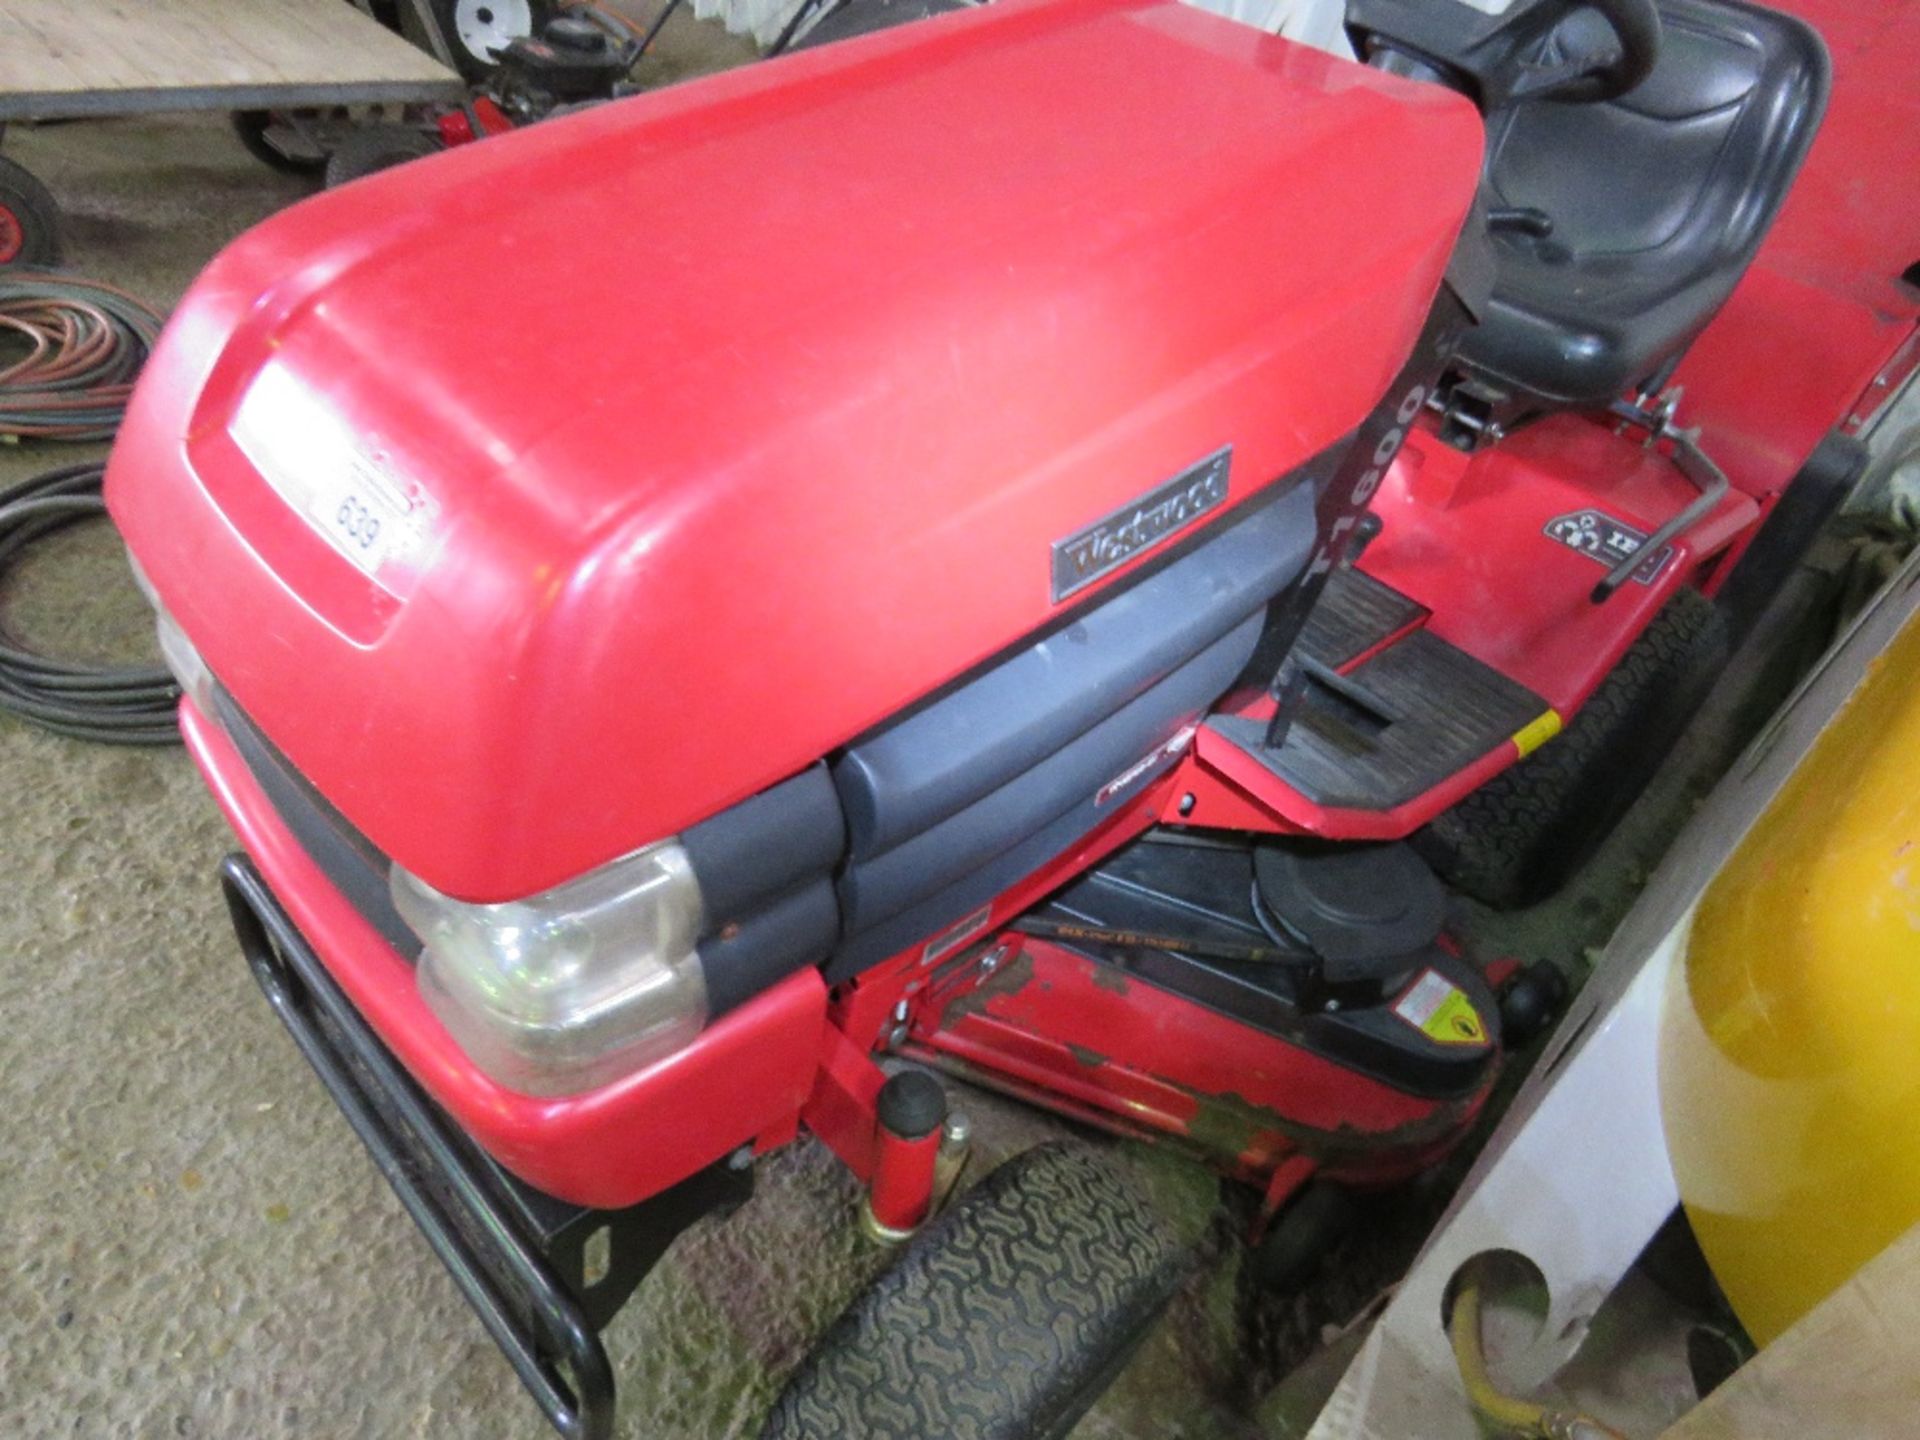 WESTWOOD T1600 HYDRO RIDE ON MOWER WITH COLLECTOR. WHEN TESTED WAS SEEN TO RUN, DRIVE, AND BLADES TU - Image 5 of 5